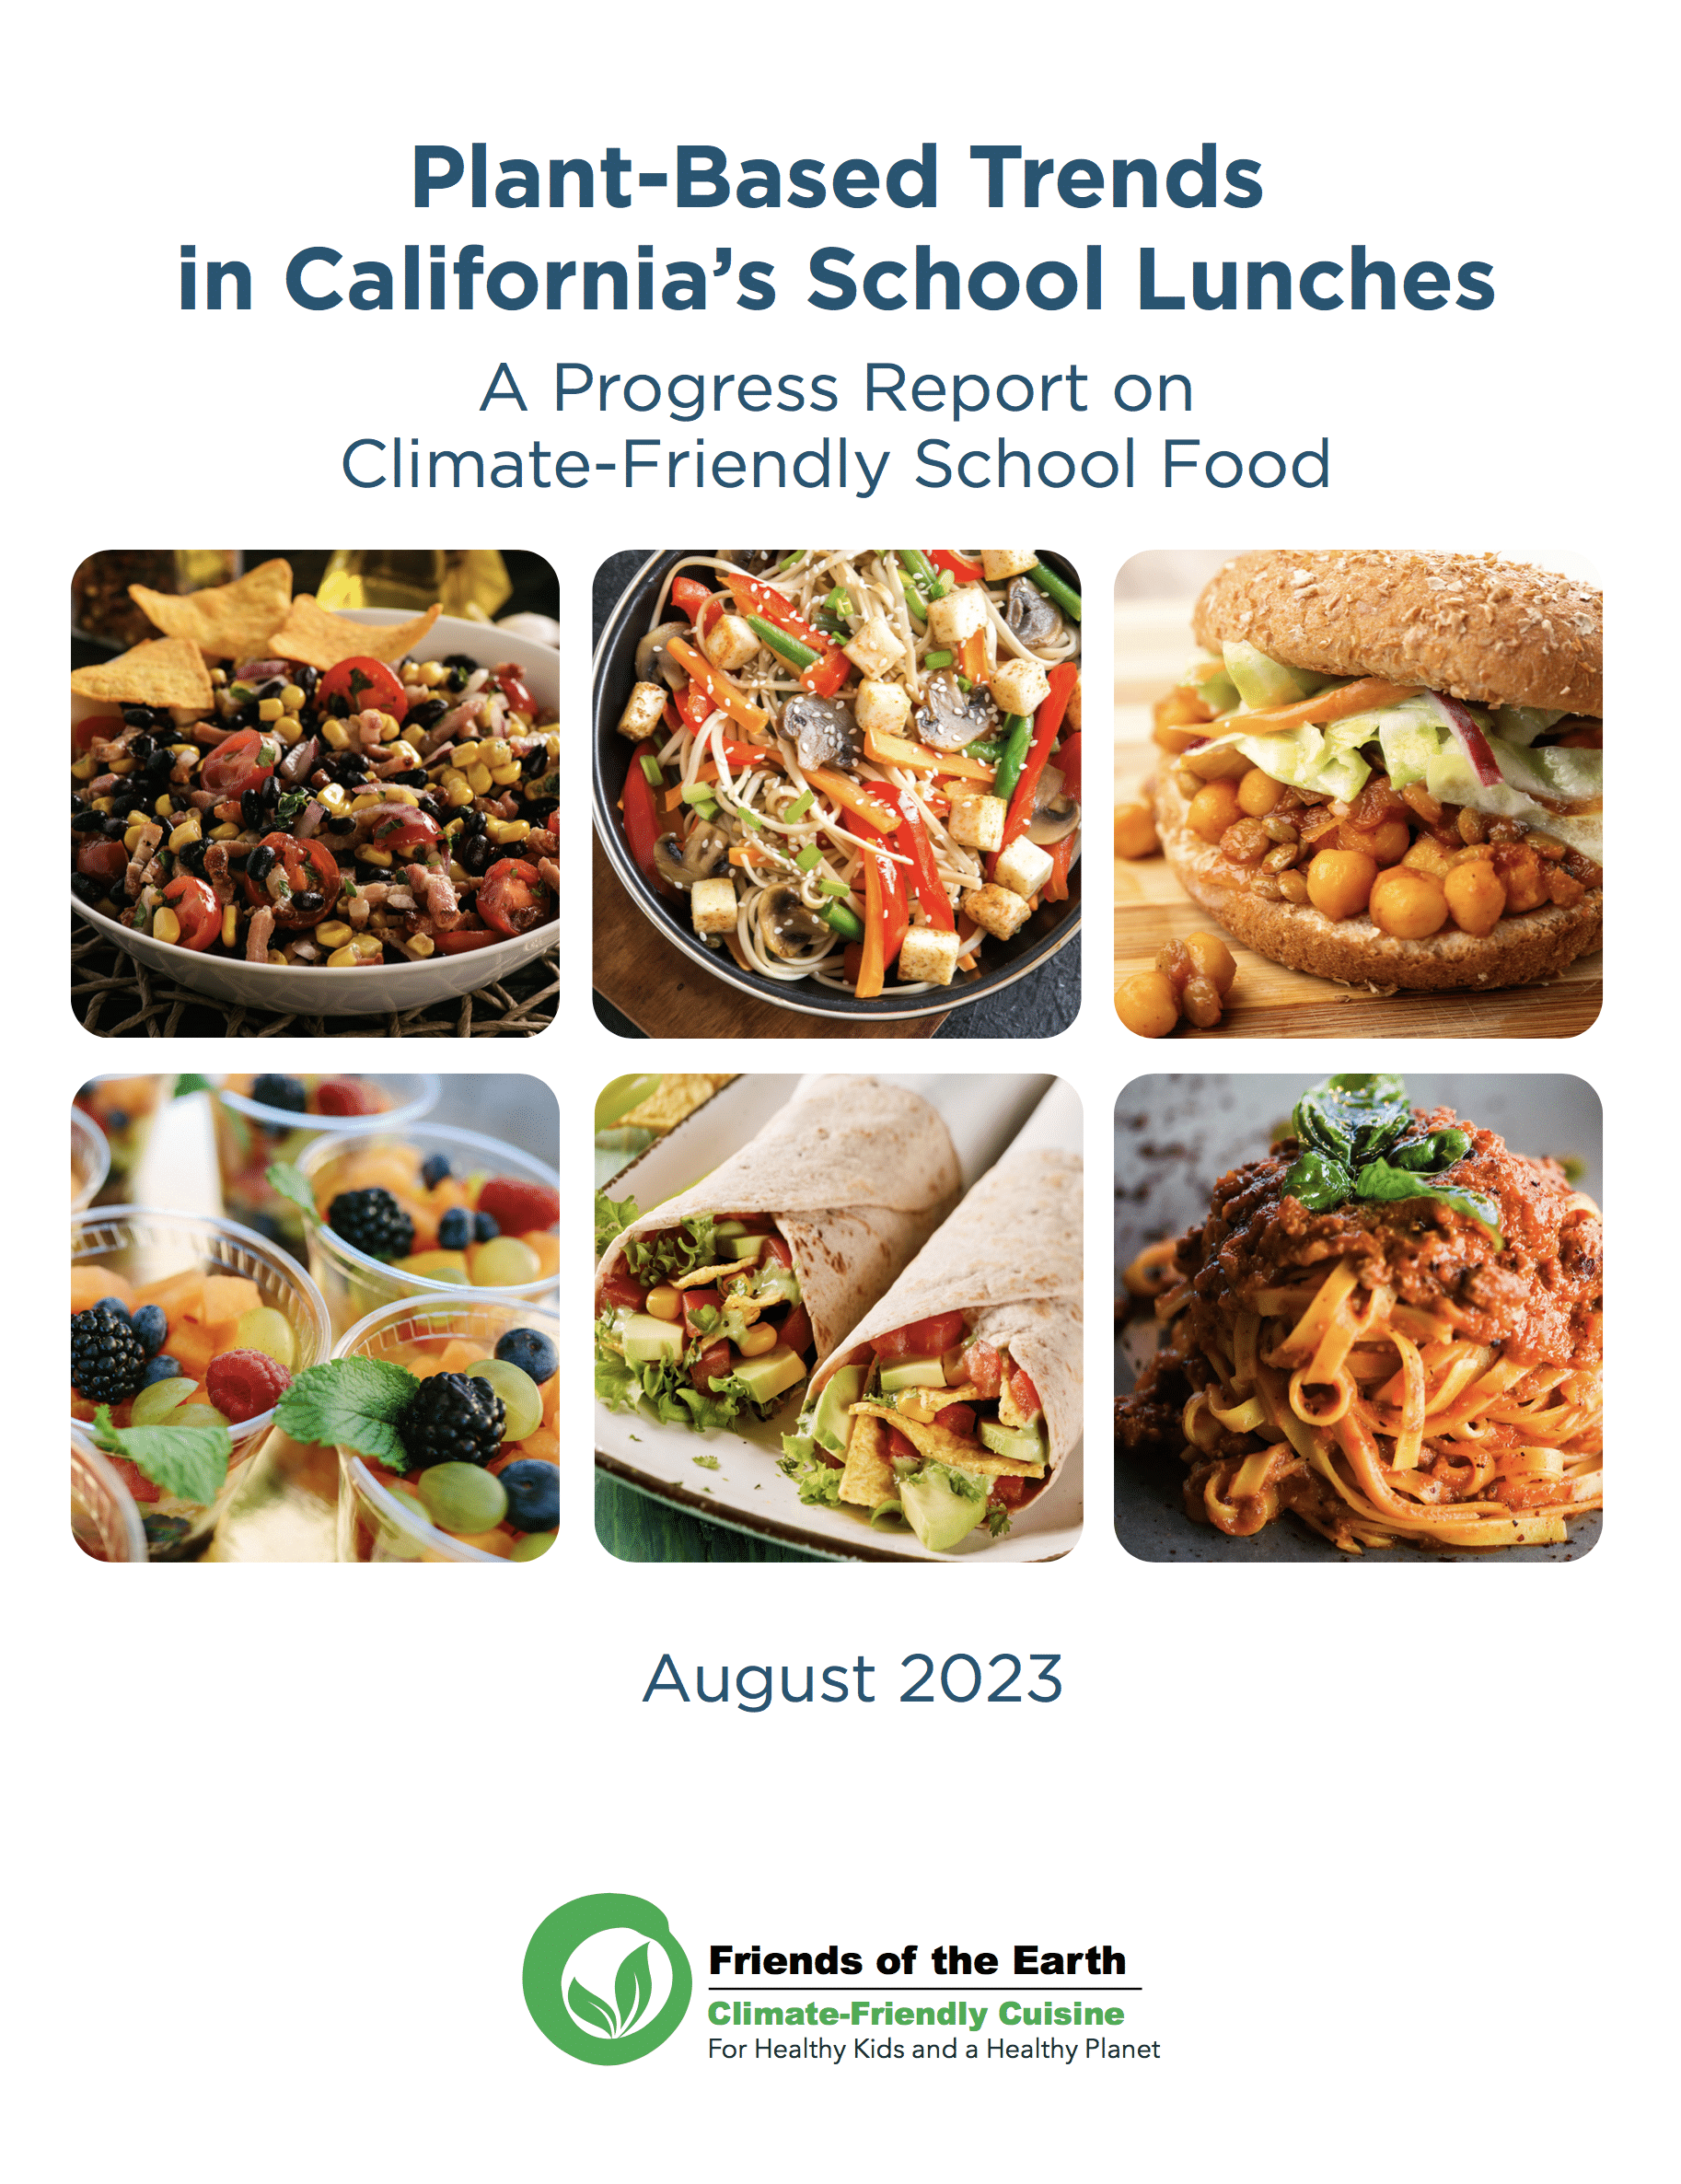 Plant-Based Trends in California’s School Lunches